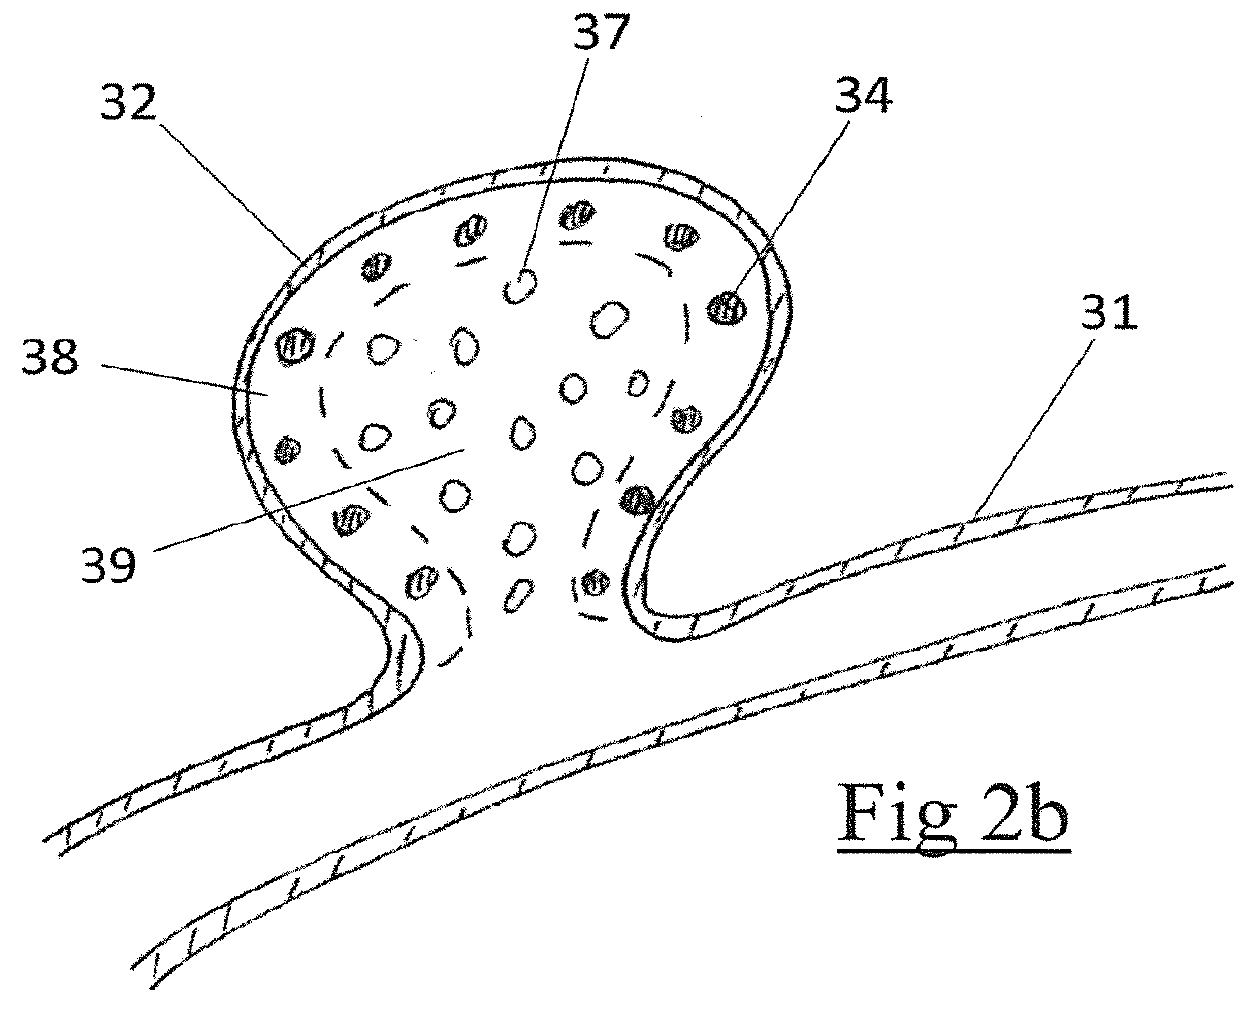 DEVICE AND METHOD FOR ENDOVASCULAR TREATMENT OF ANEURYSMS USING EMBOLIC ePTFE